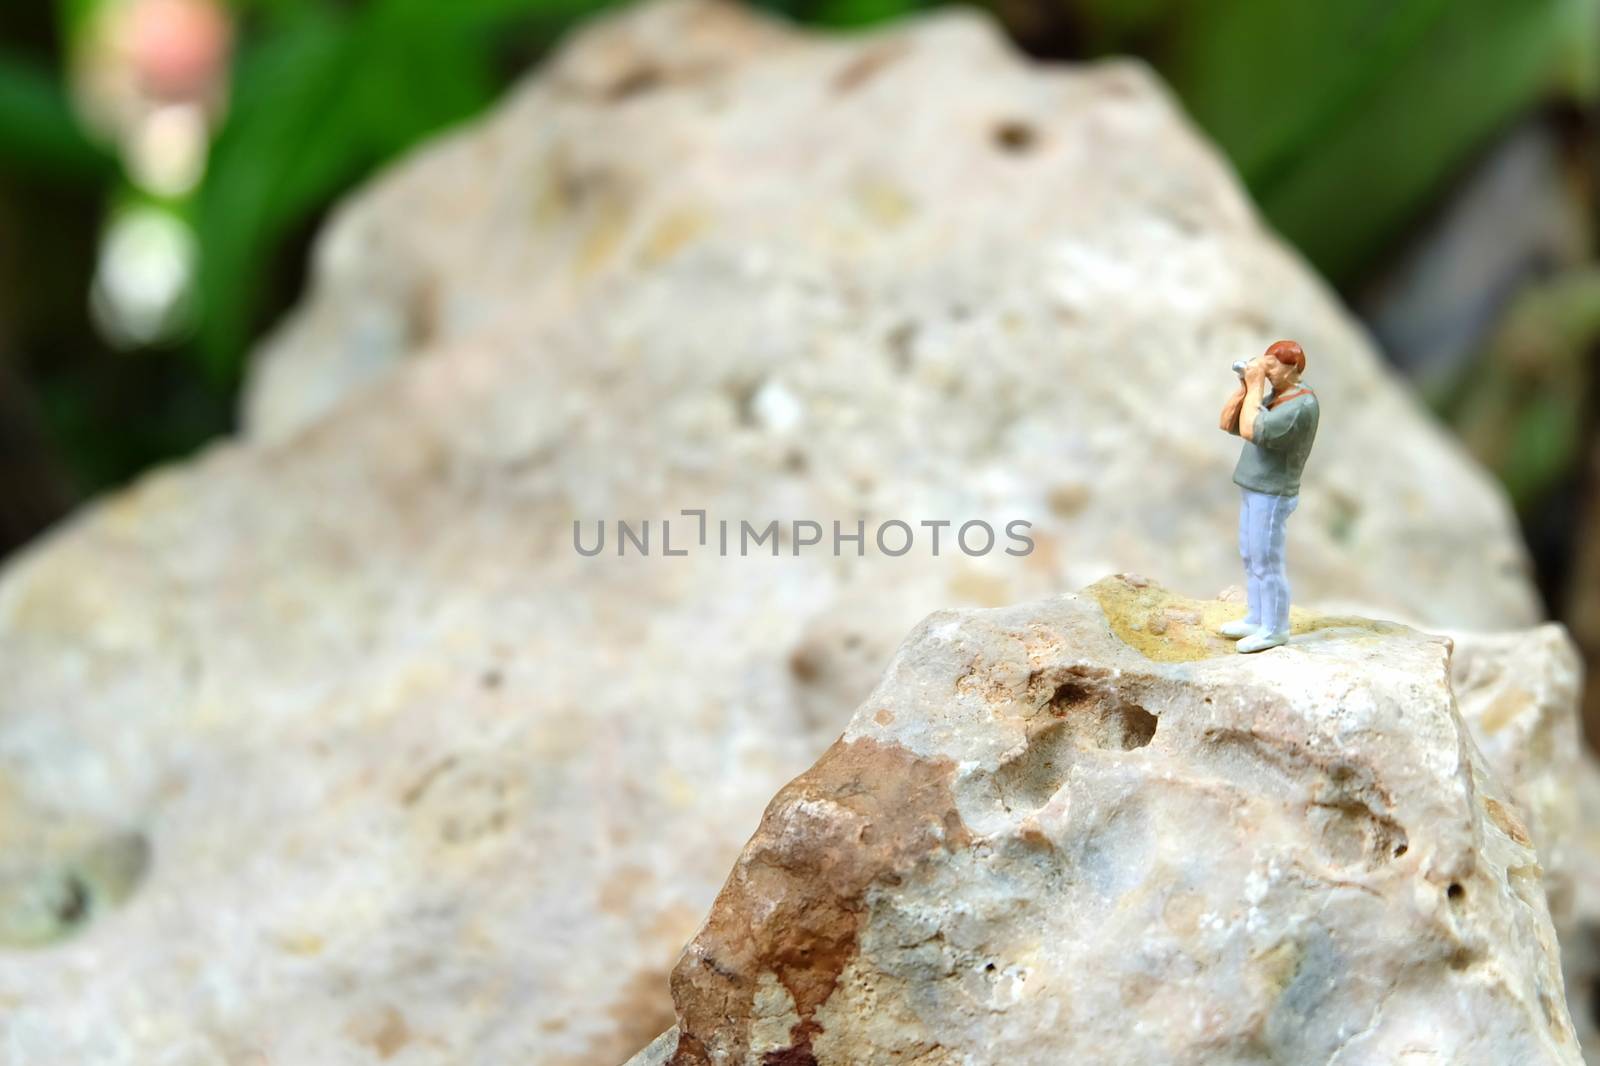 Miniature Photographer, Taking Photo on The Cliff. by mesamong